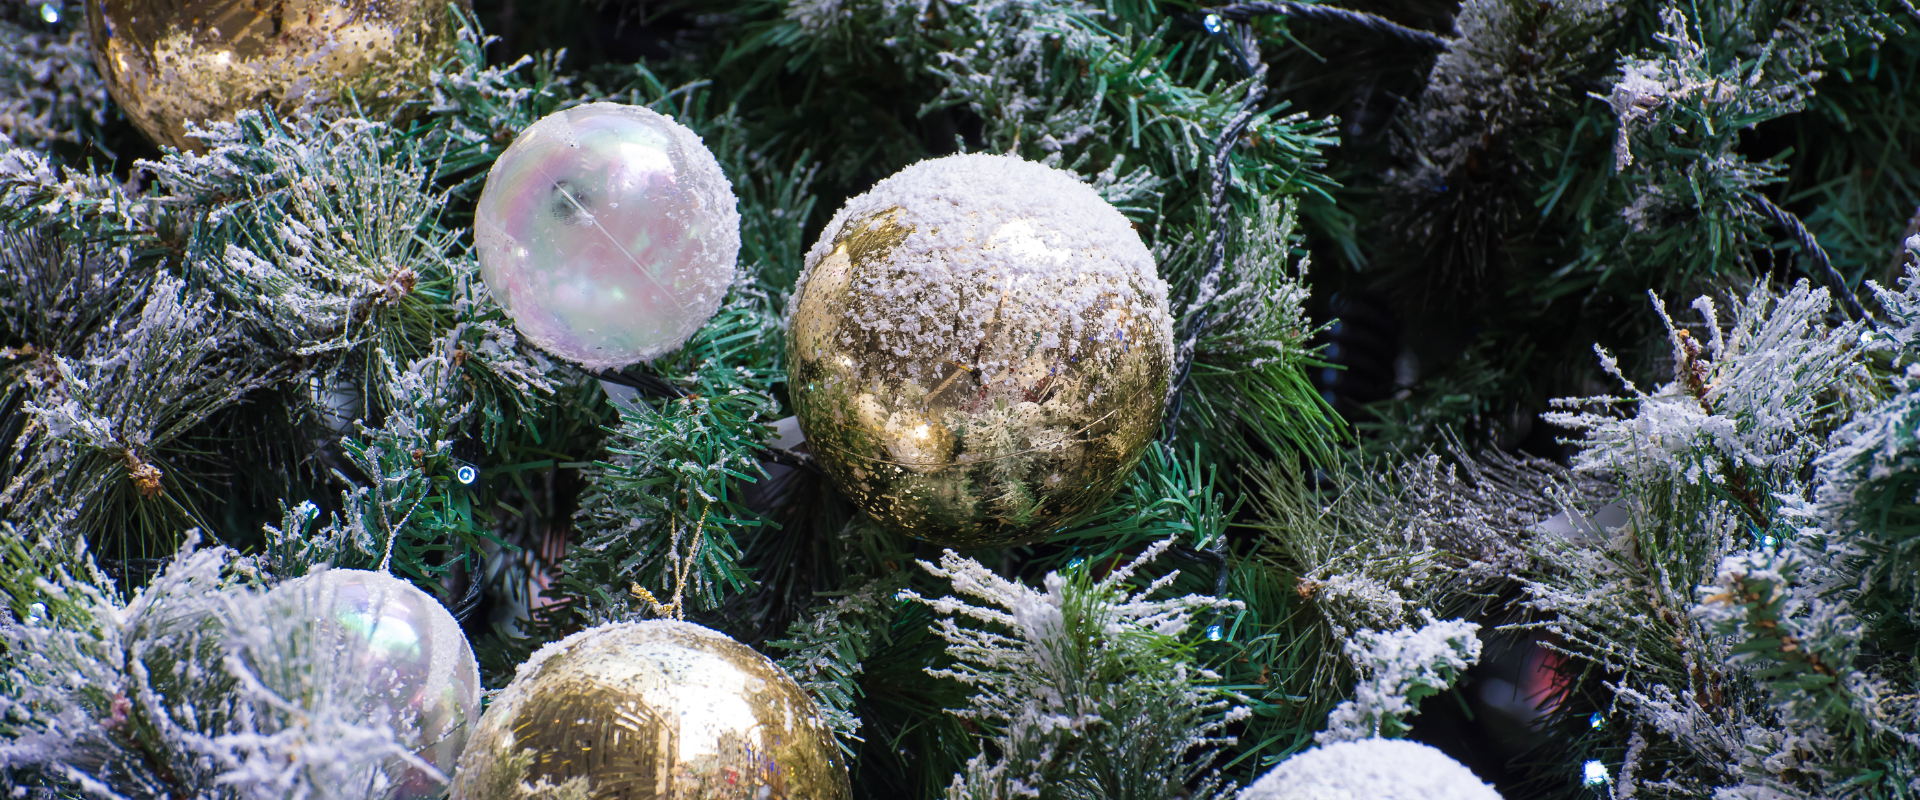 A close-up of a Christmas tree decorated with baubles and fake snow